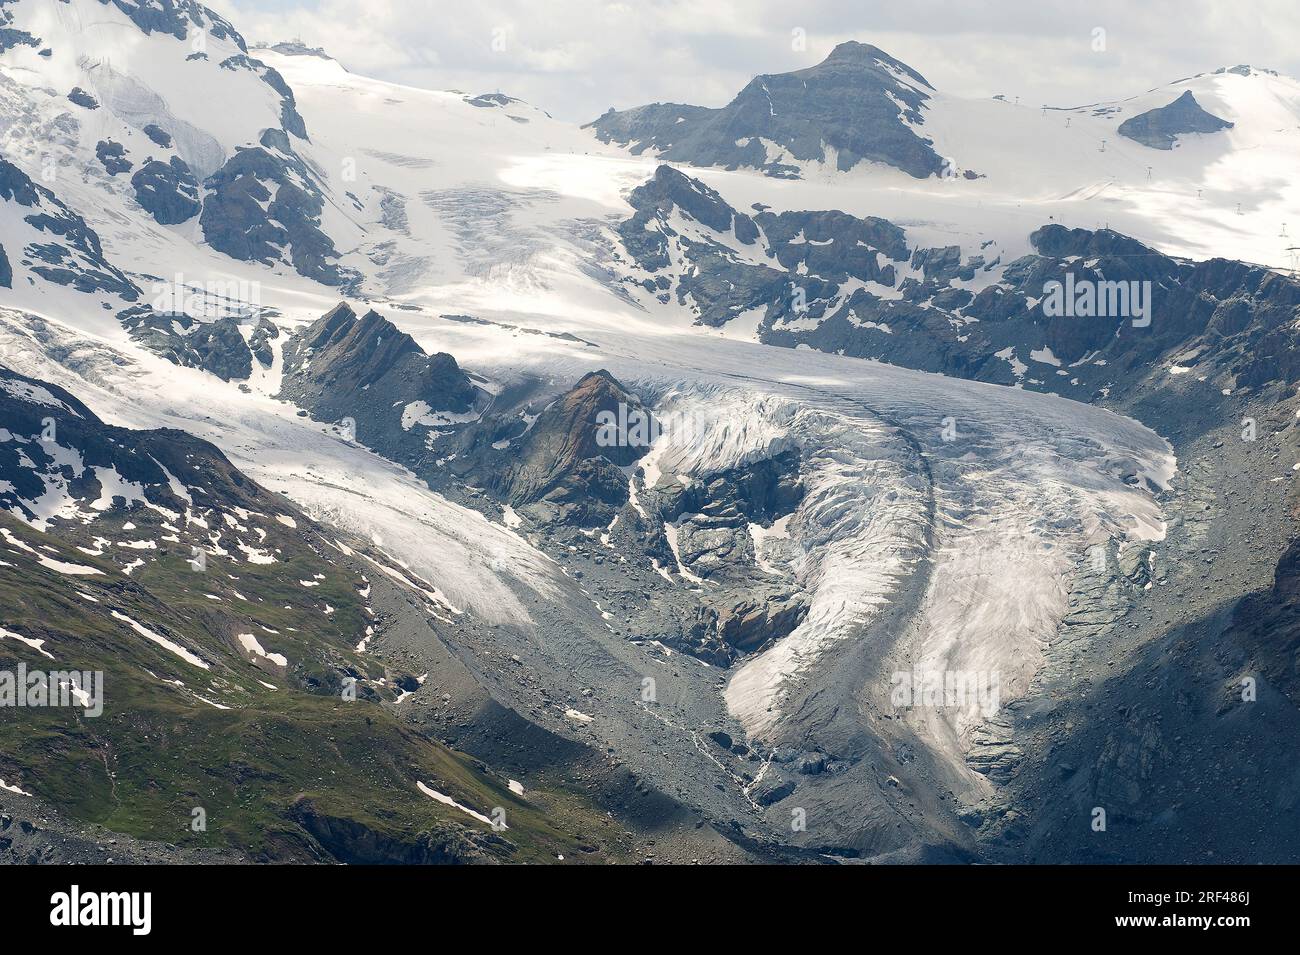 Gornergrat glacier with main and secondary glaciers, cirques, hanging valleys, aretes, horns, crevases and moraines. Alps, Switzerland. Stock Photo